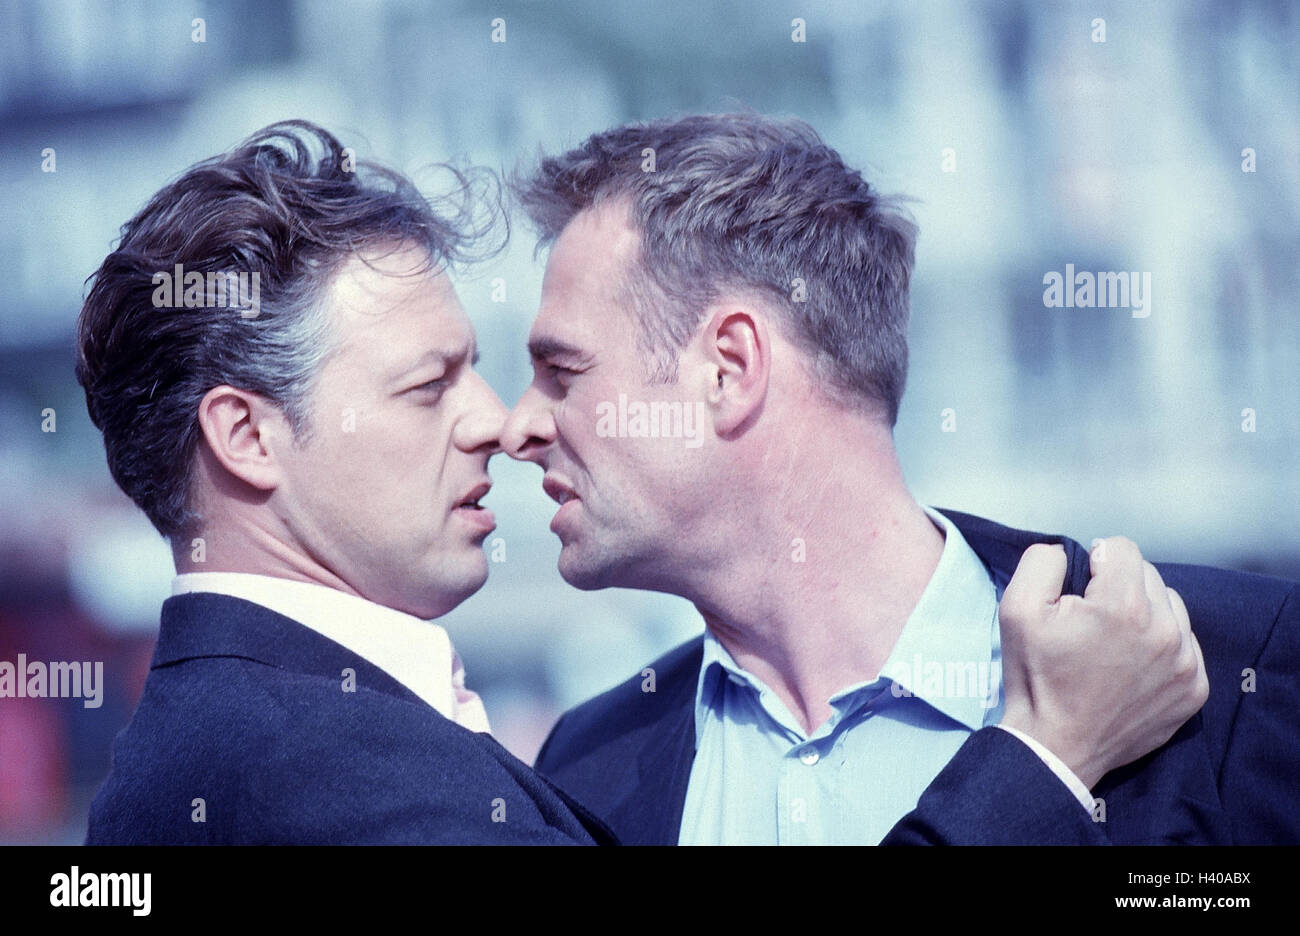 Men, two, fight, touch, noses, page portrait, outside, man, argue, attack adults, expression, rage, fury, angrily, furiously, aggressively, aggressiveness, enemies, hostility, violent, portrait, Stock Photo